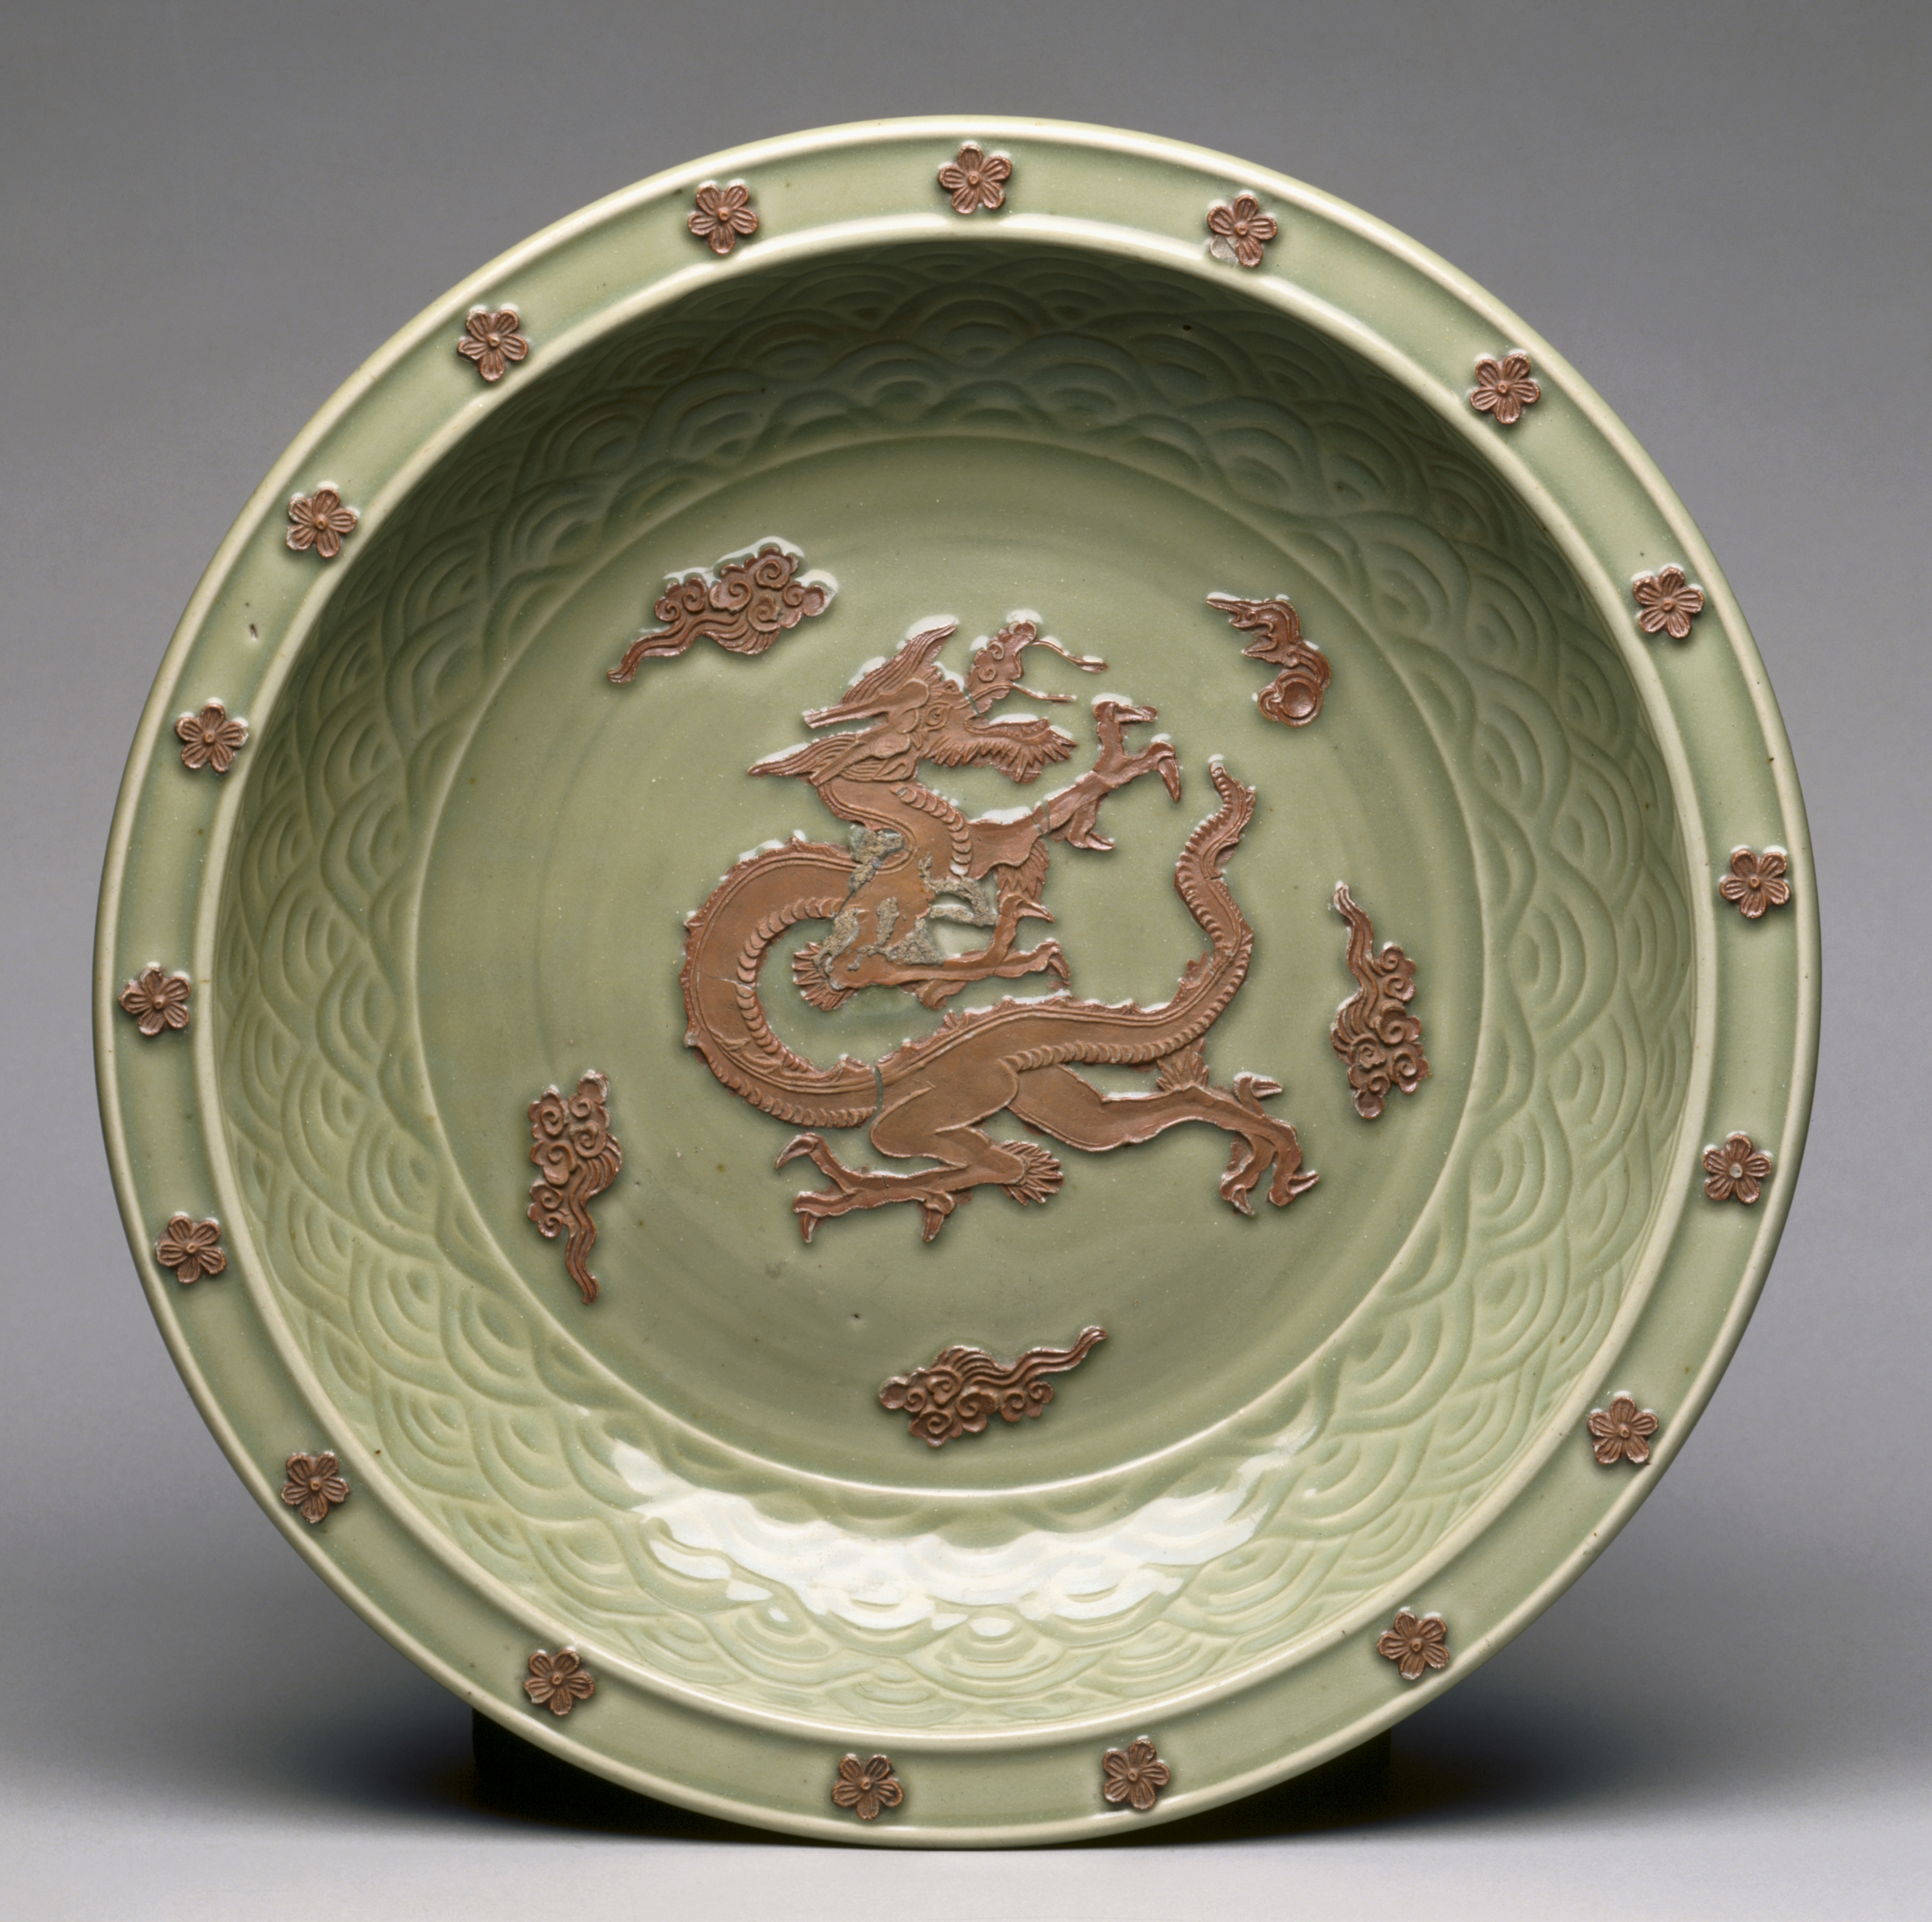 Plate with Relief Dragon among Clouds